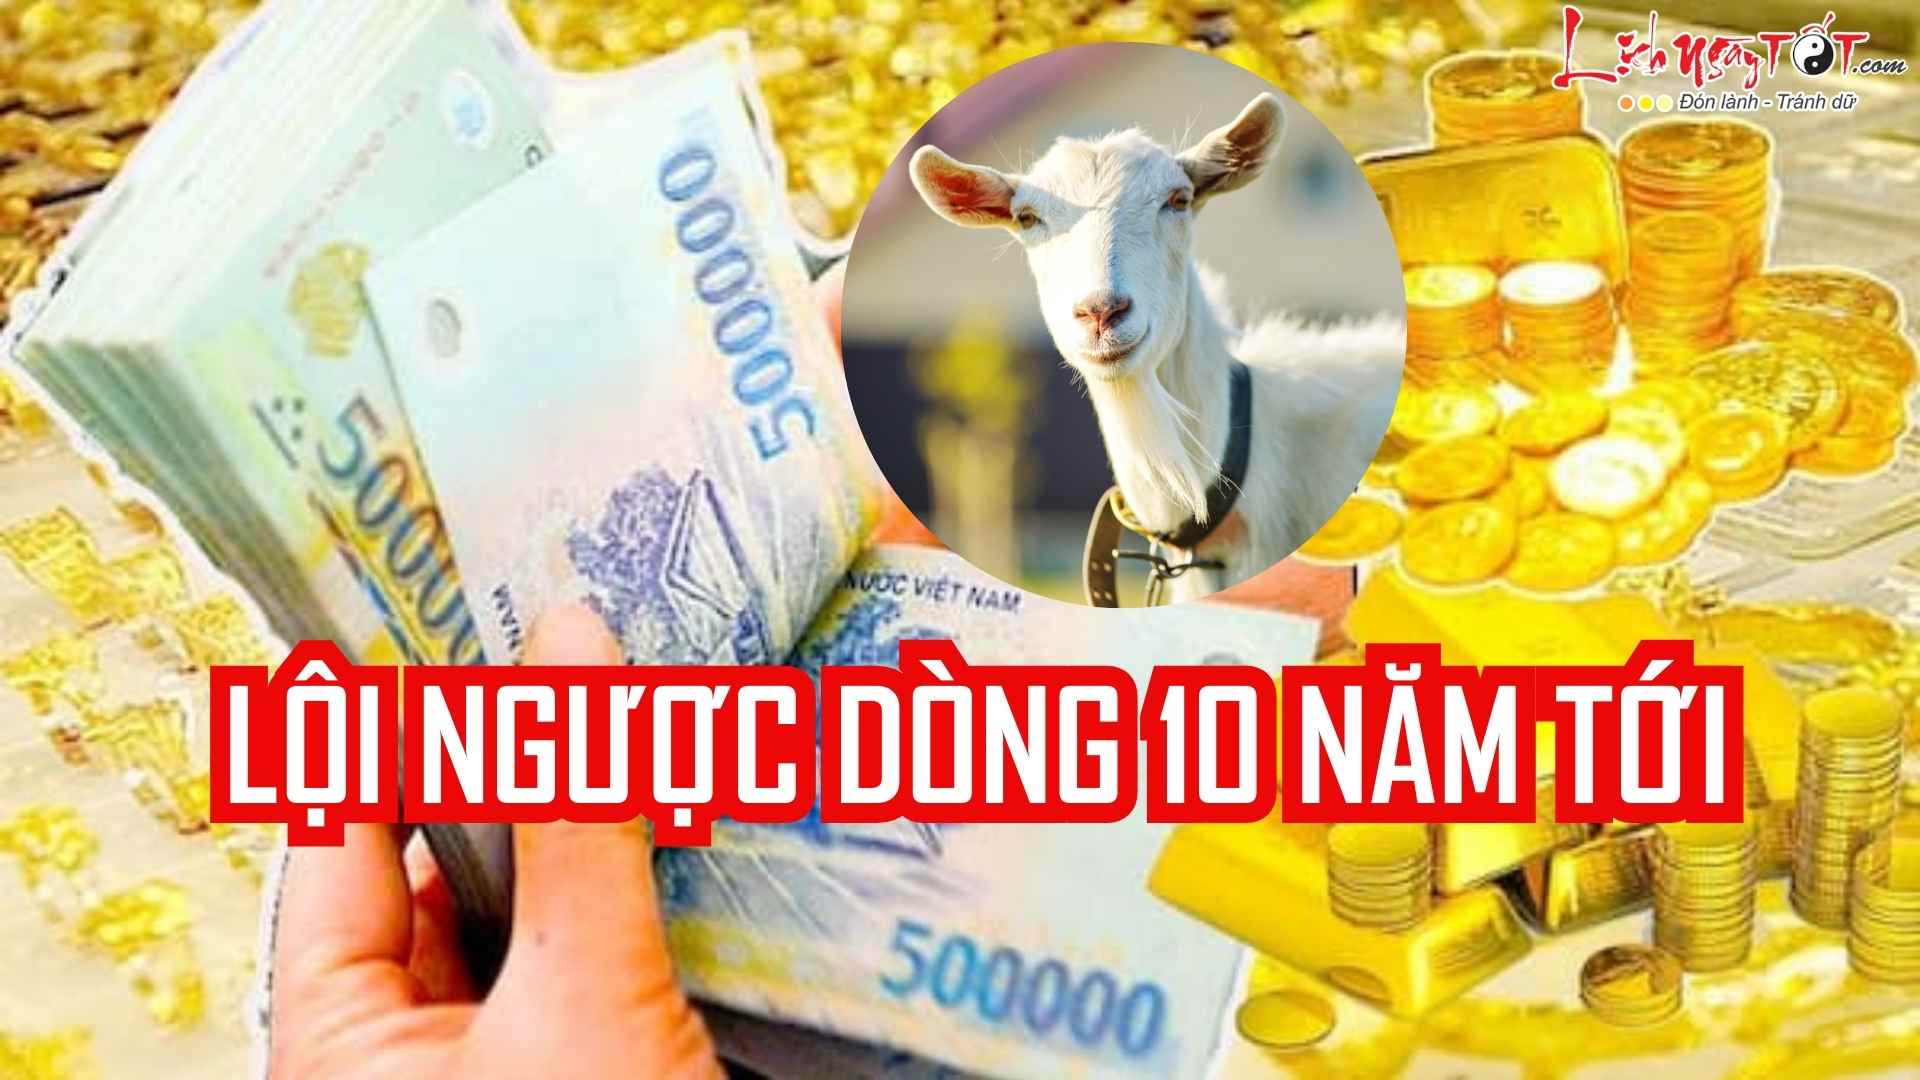 Top 3 con giap loi nguoc dong 10 nam toi